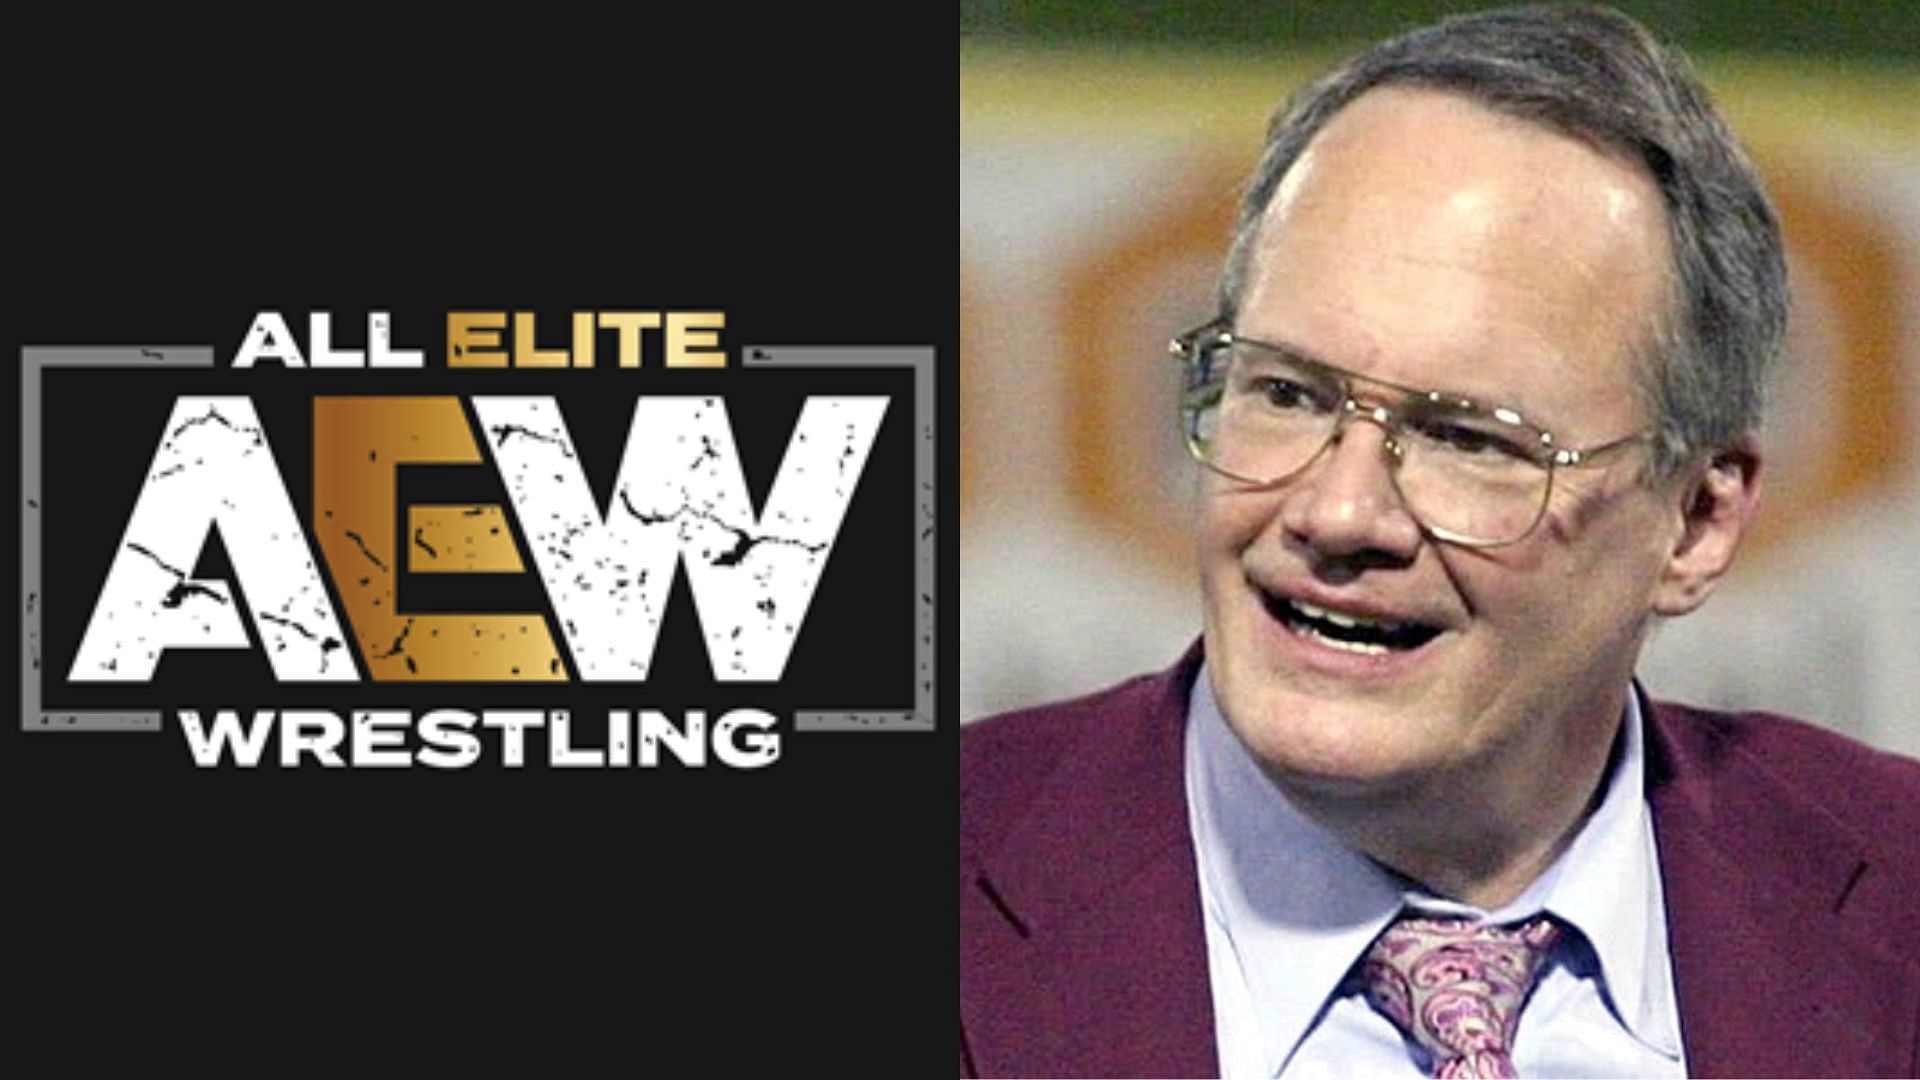 Jim Cornette has been a vocal critic of AEW.